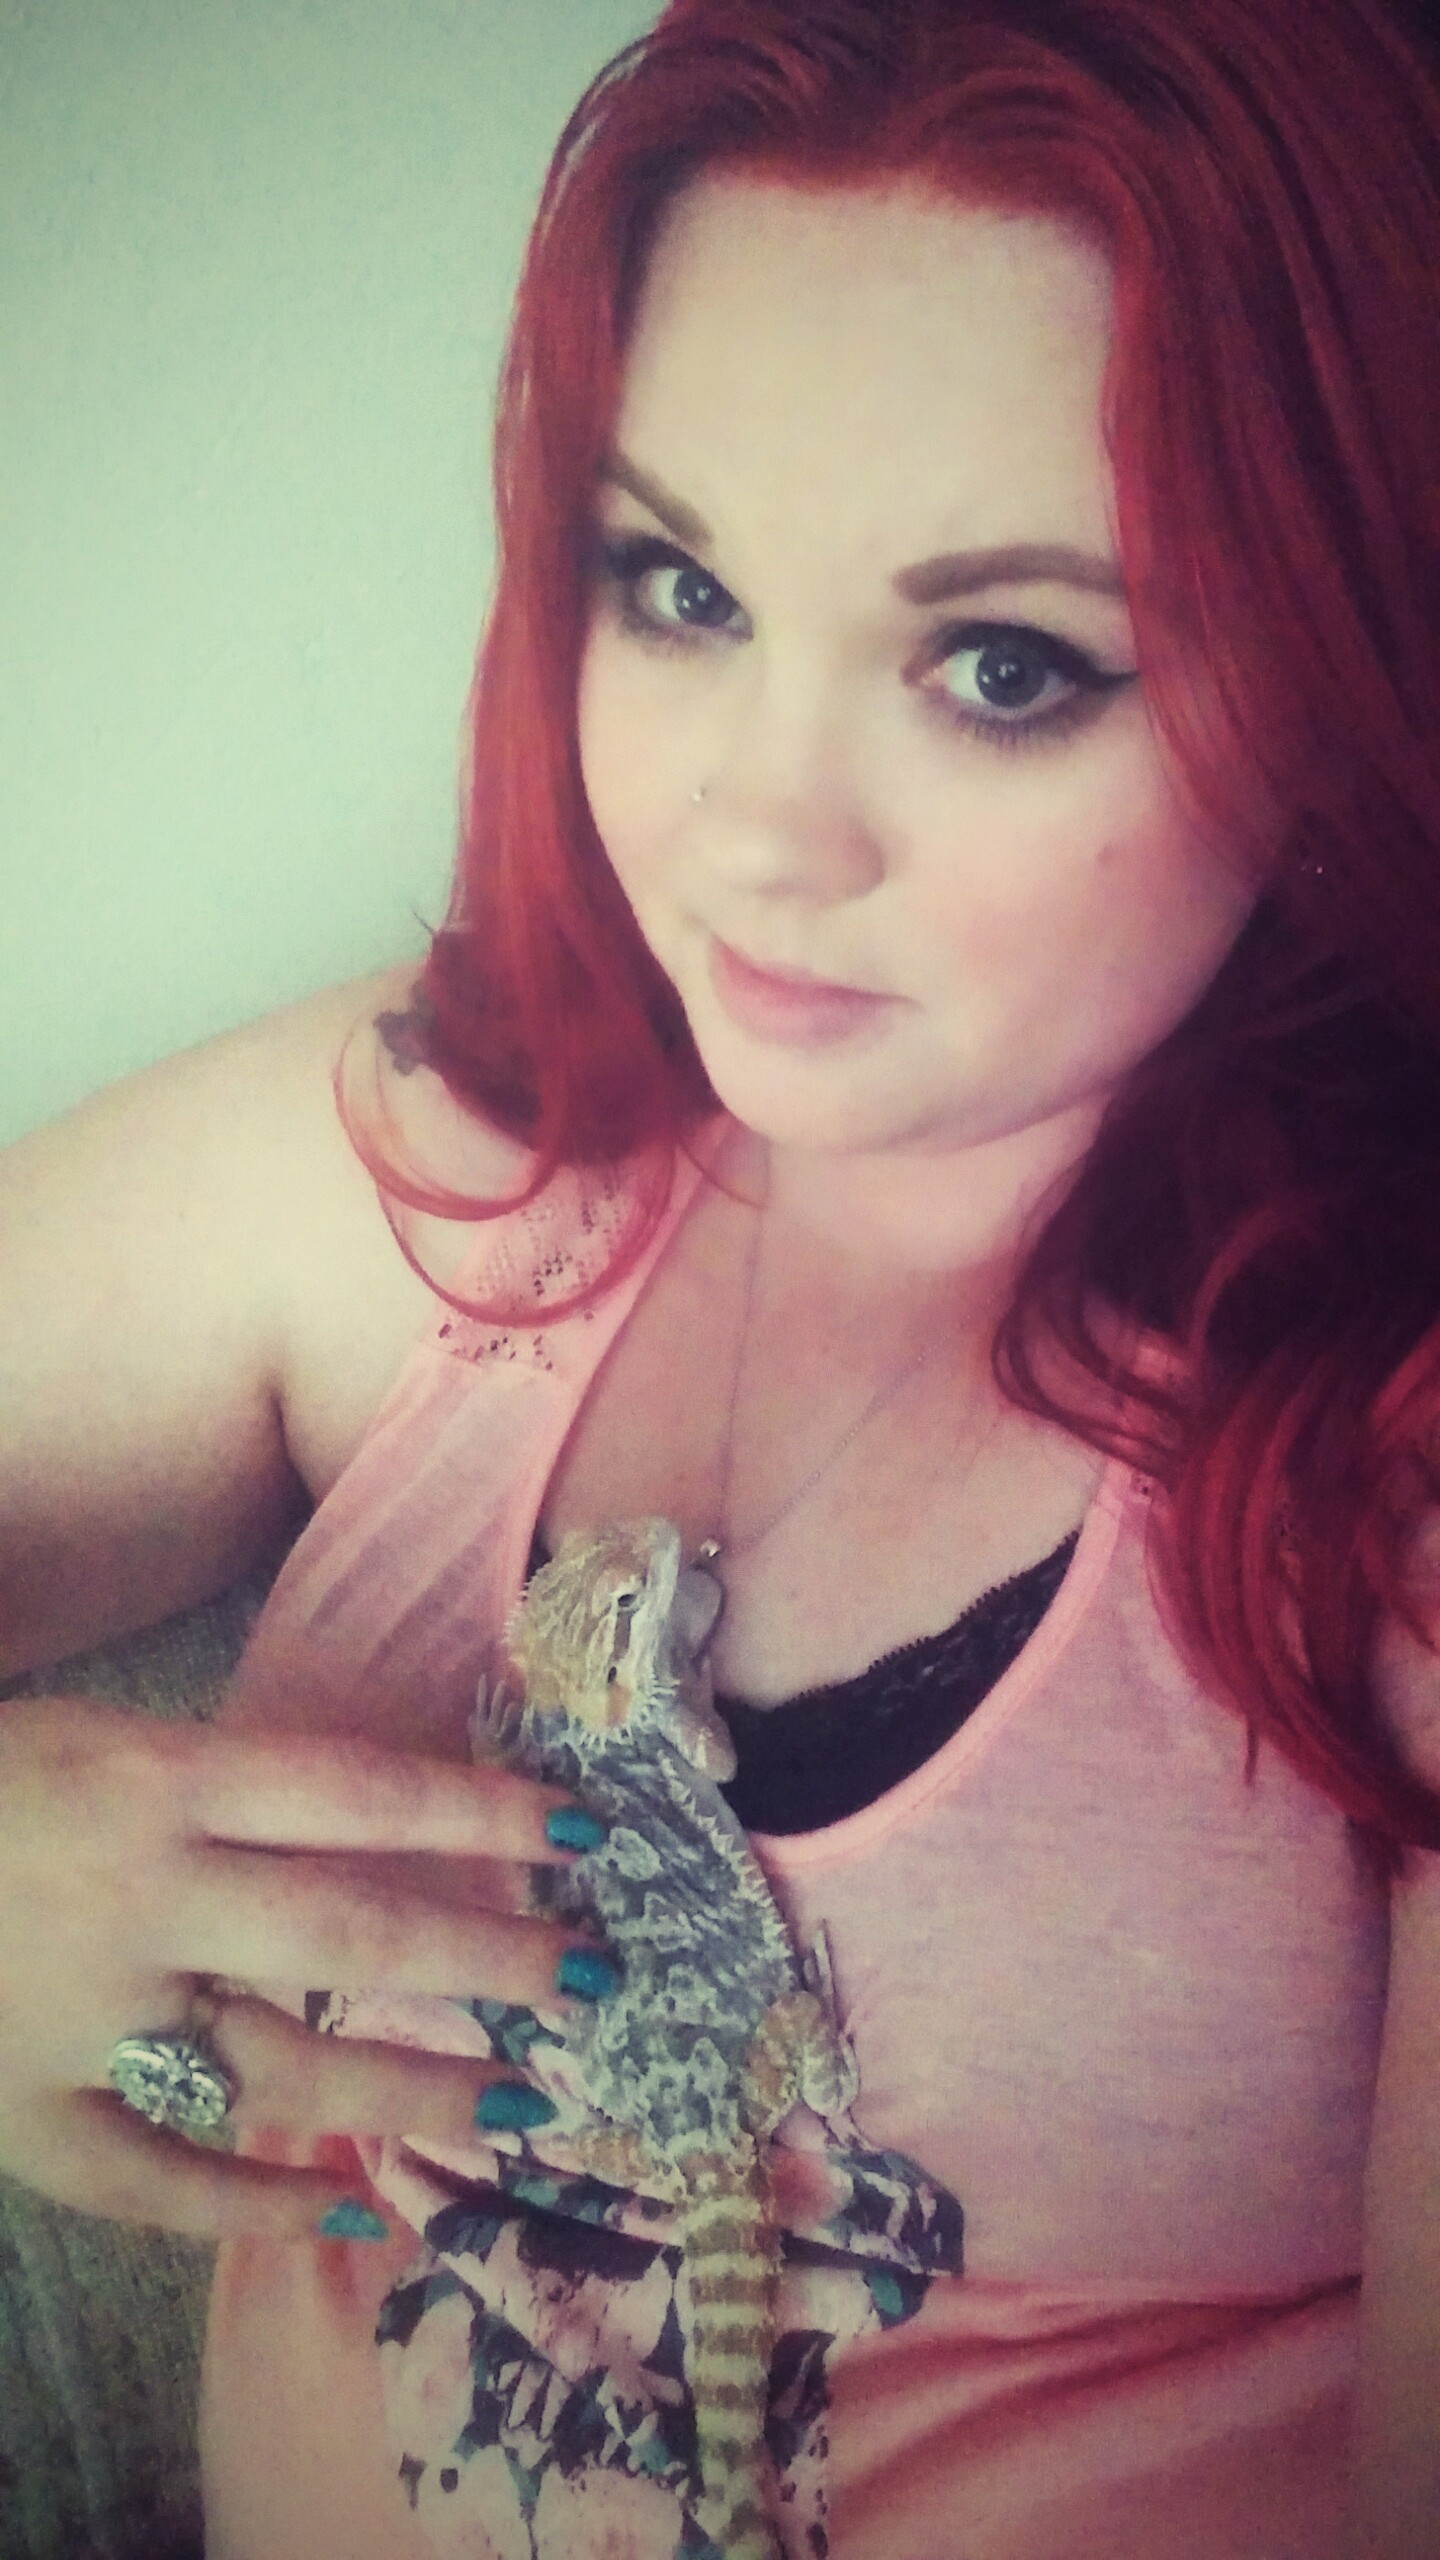 Woman holding her pet bearded dragon